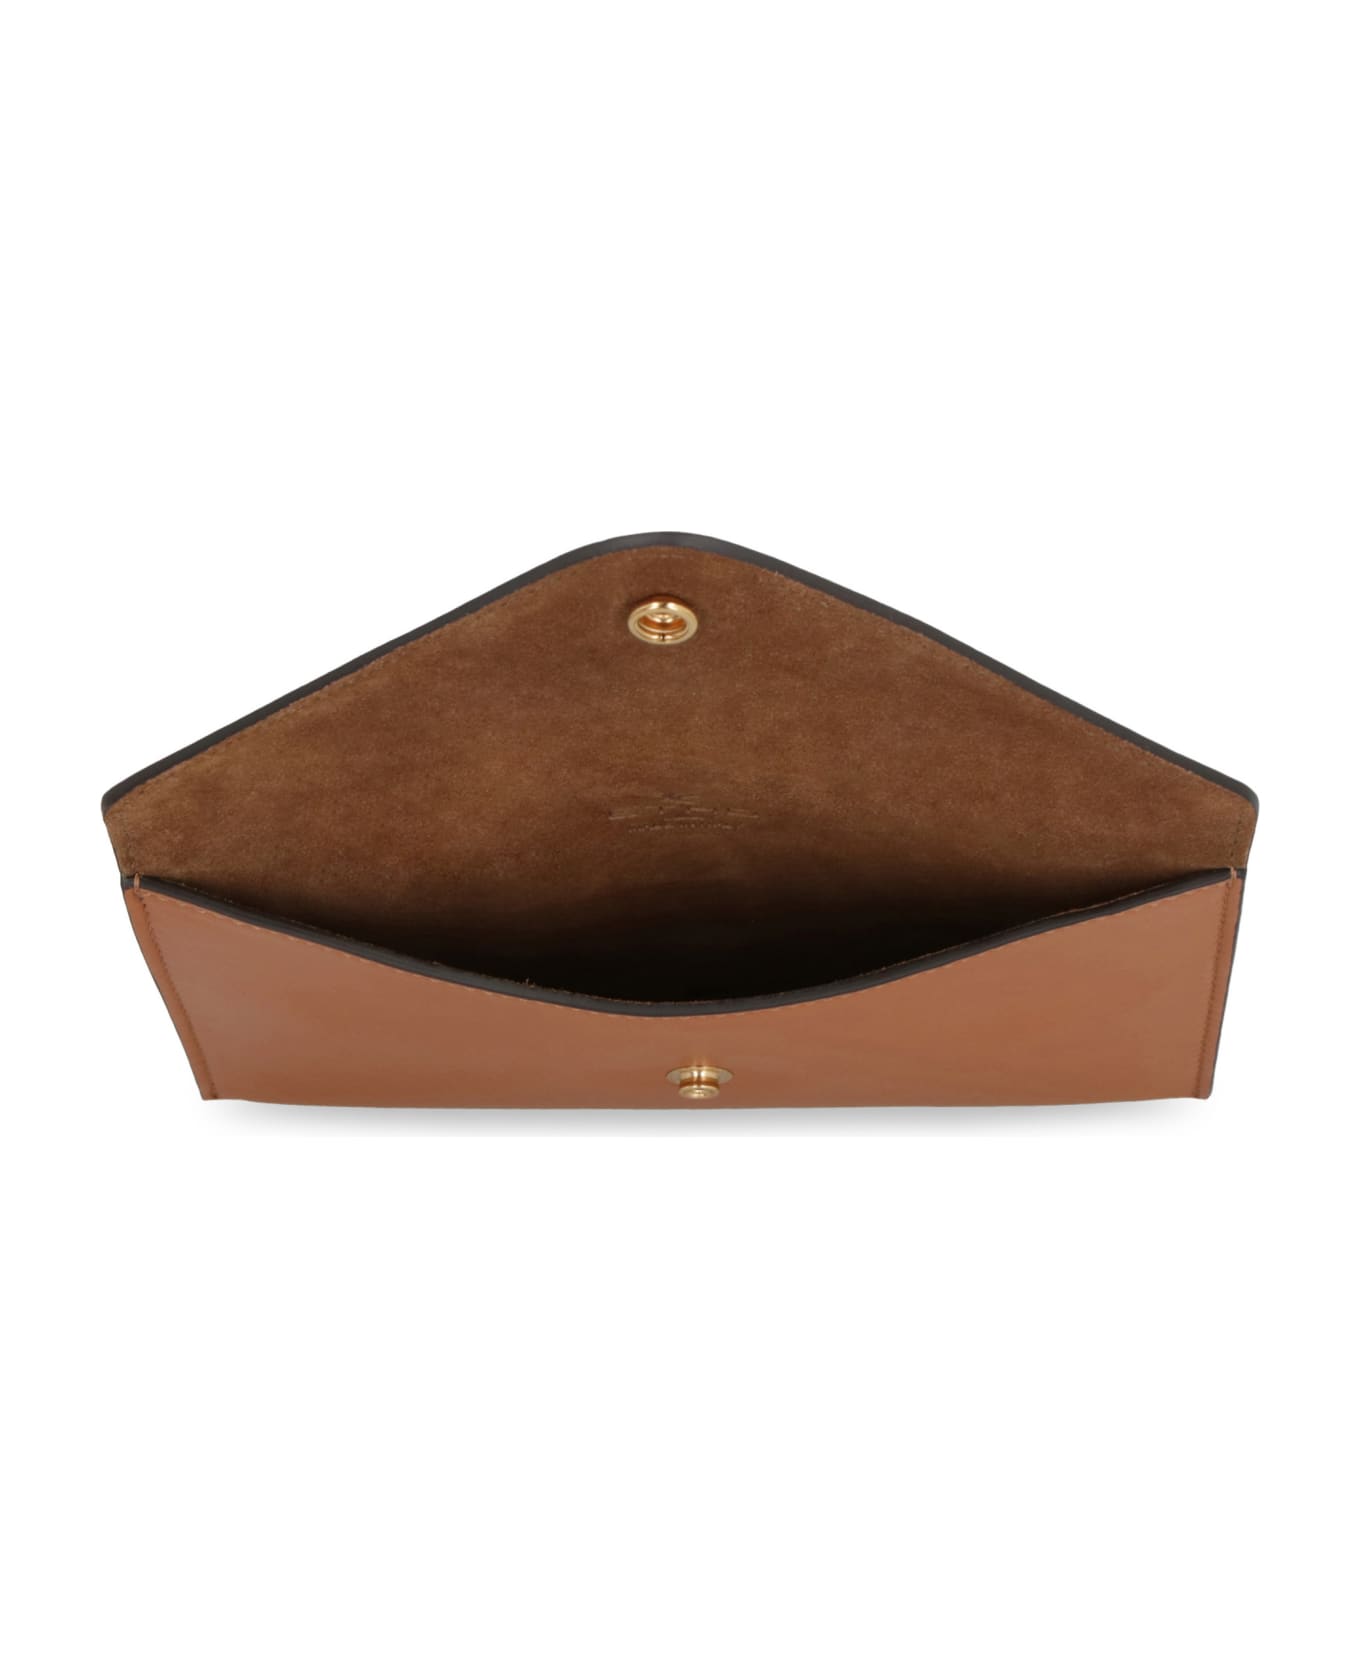 Etro Leather Flat Pouch - Saddle Brown